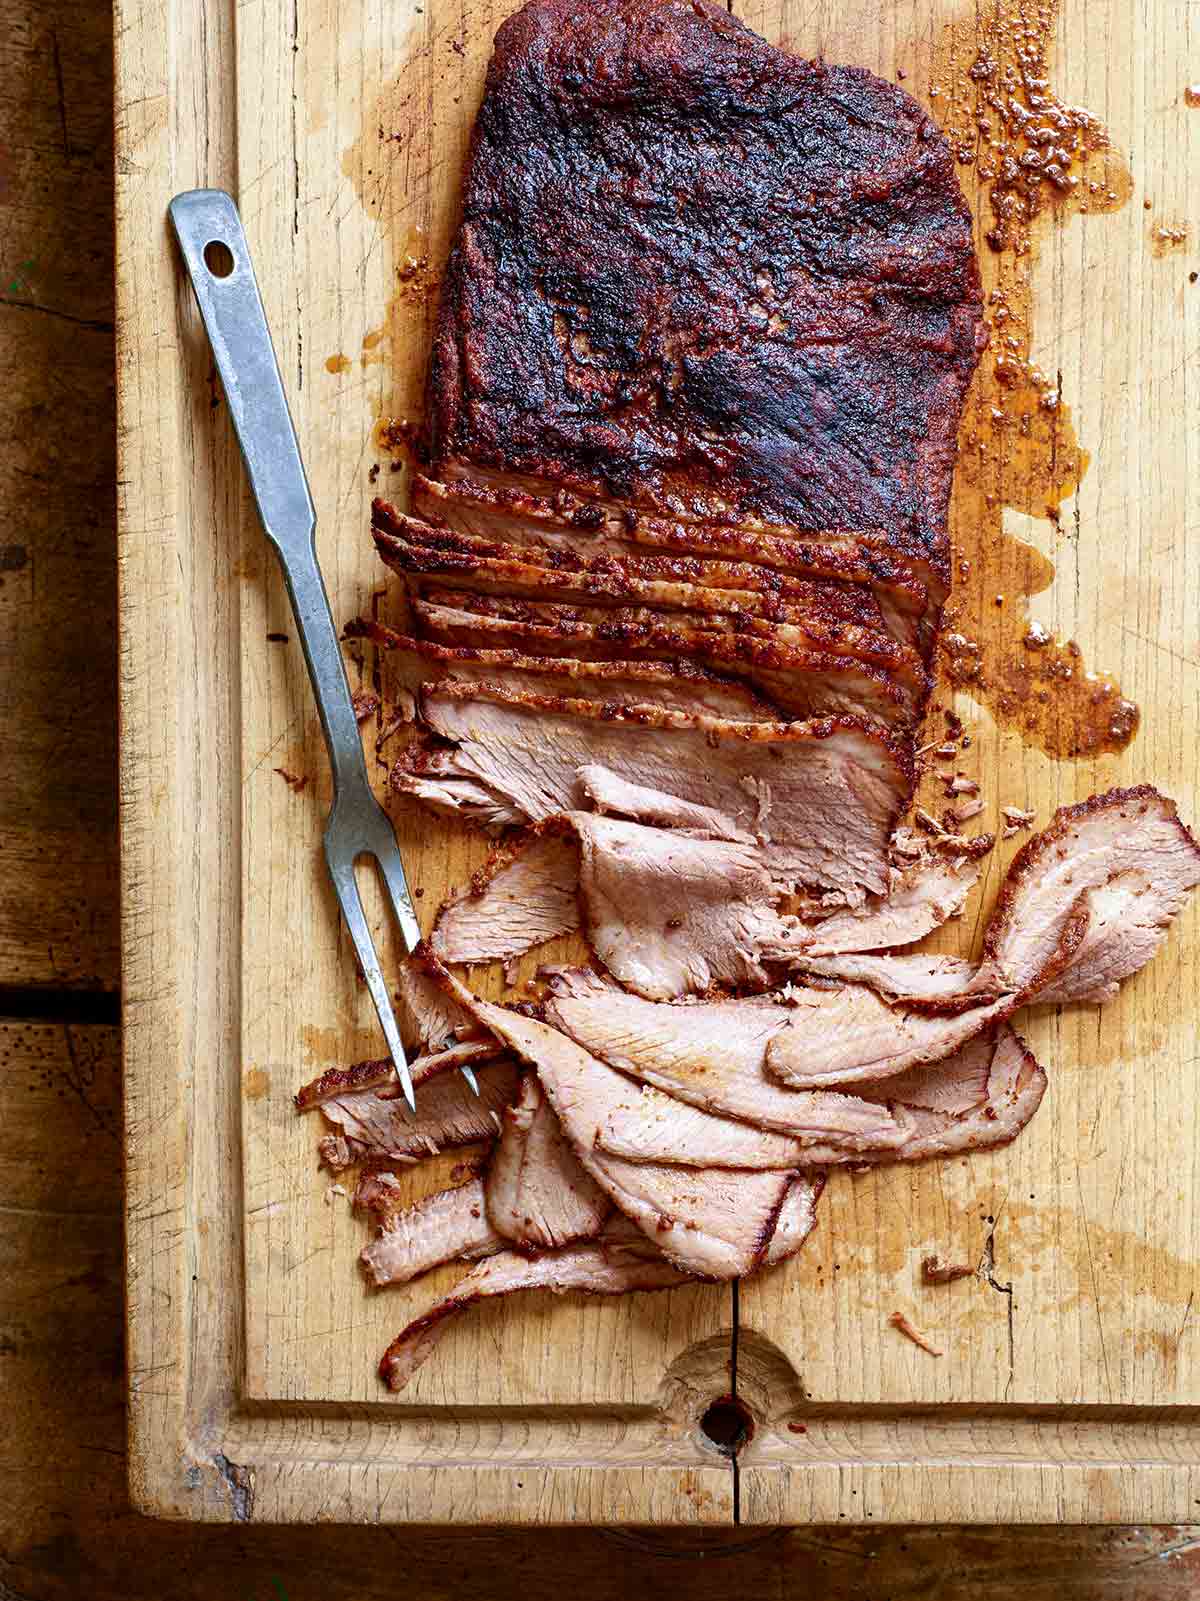 A partially sliced smoked brisket on a wooden carving board with a carving fork on the side.